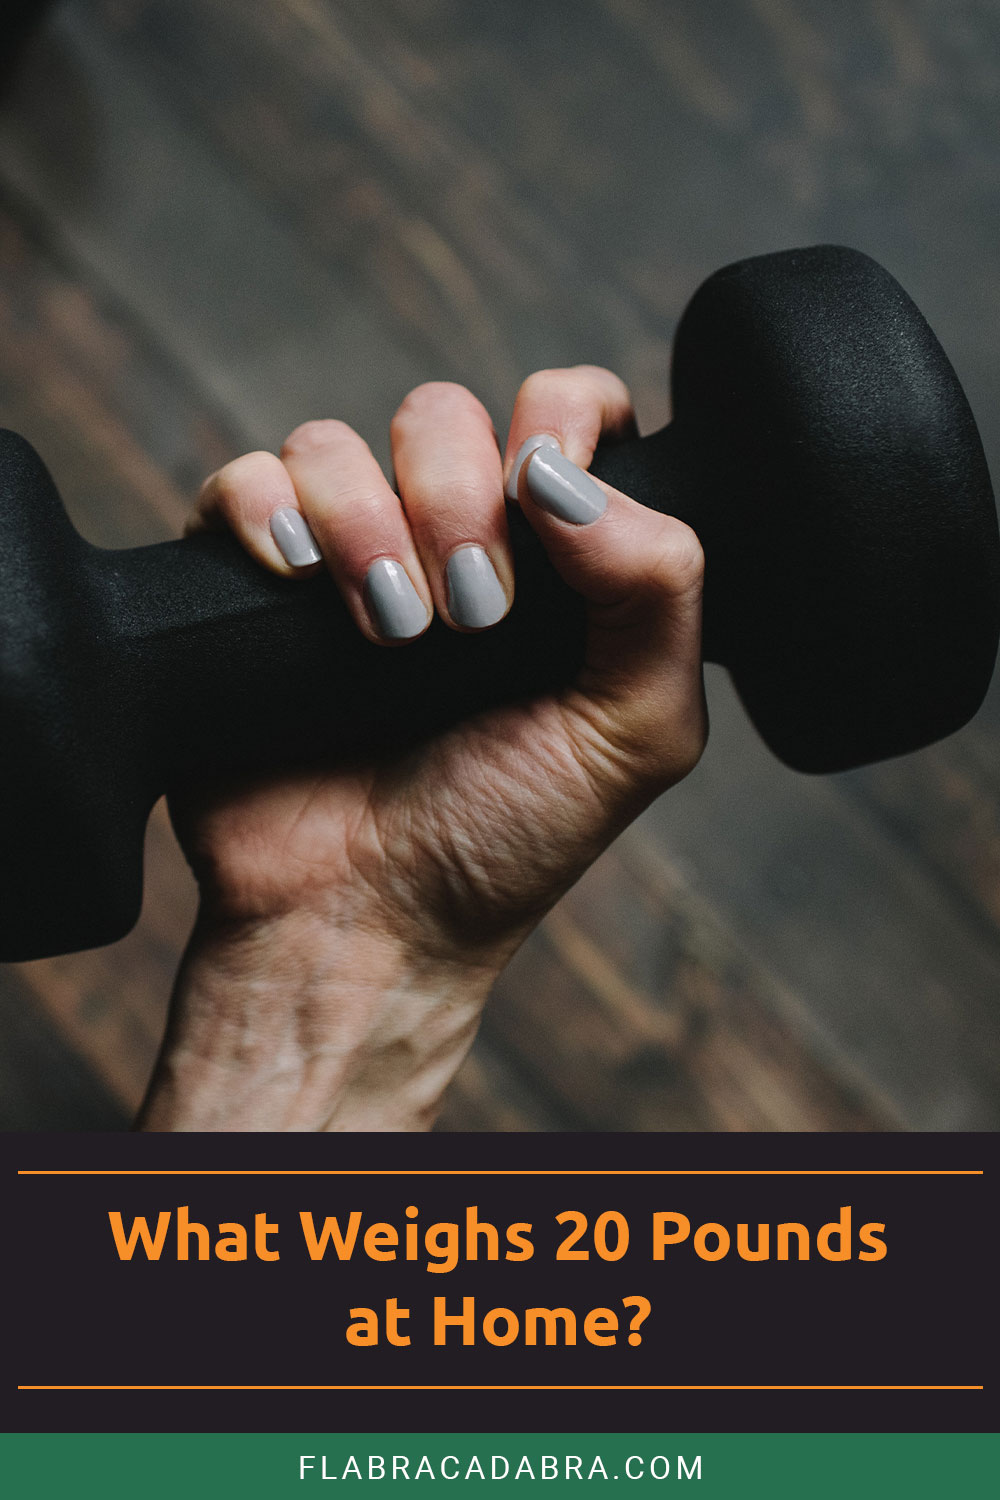 What Weighs 20 Pounds at Home?